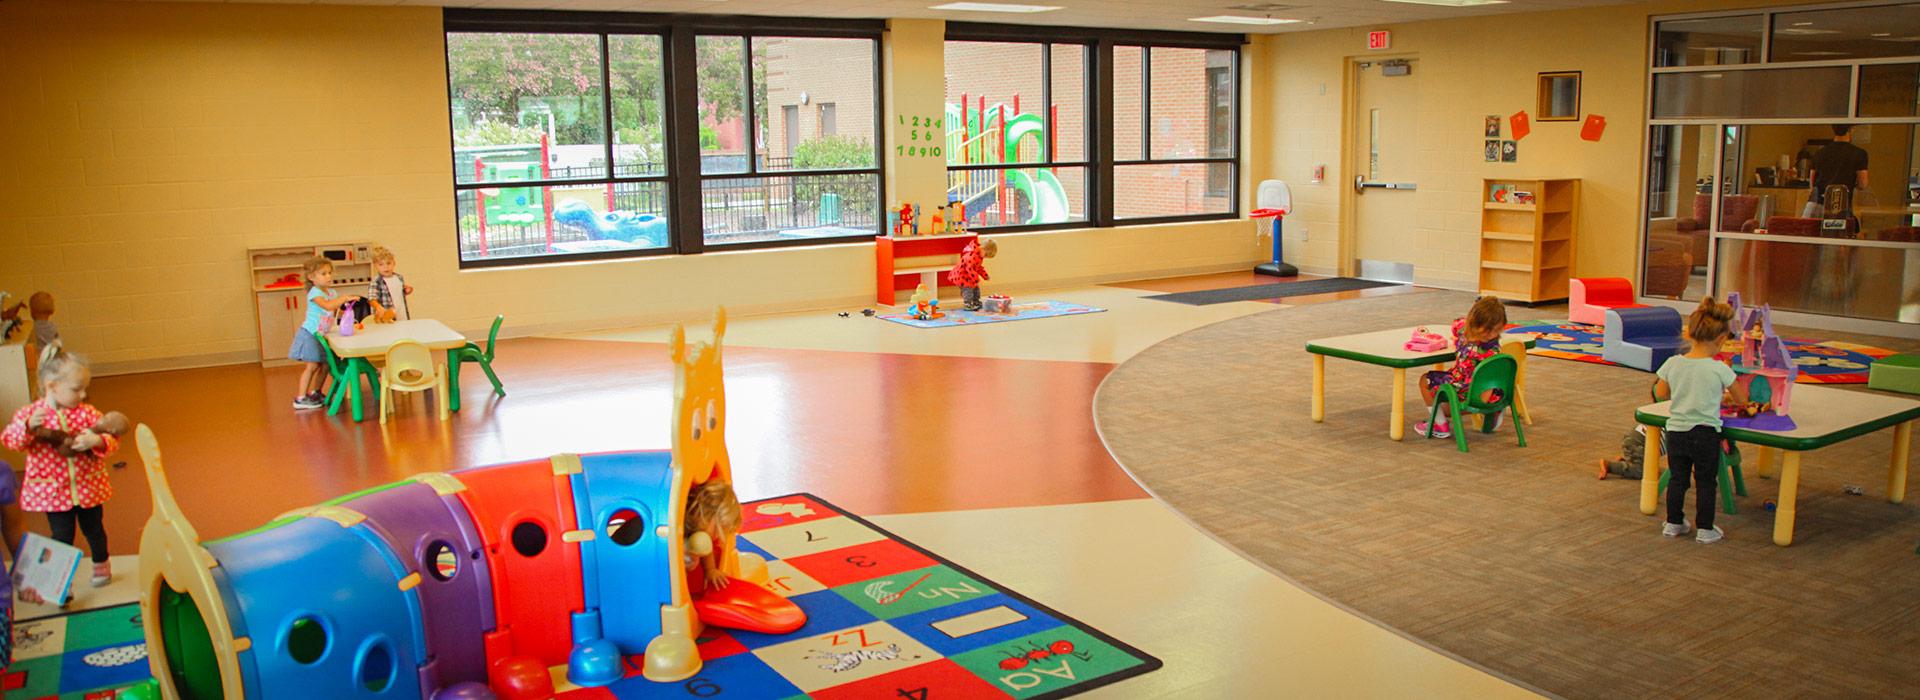 Children playing in the Hampton Roads Community Foundation Stay & Play drop-in child care center at the YMCA on Granby